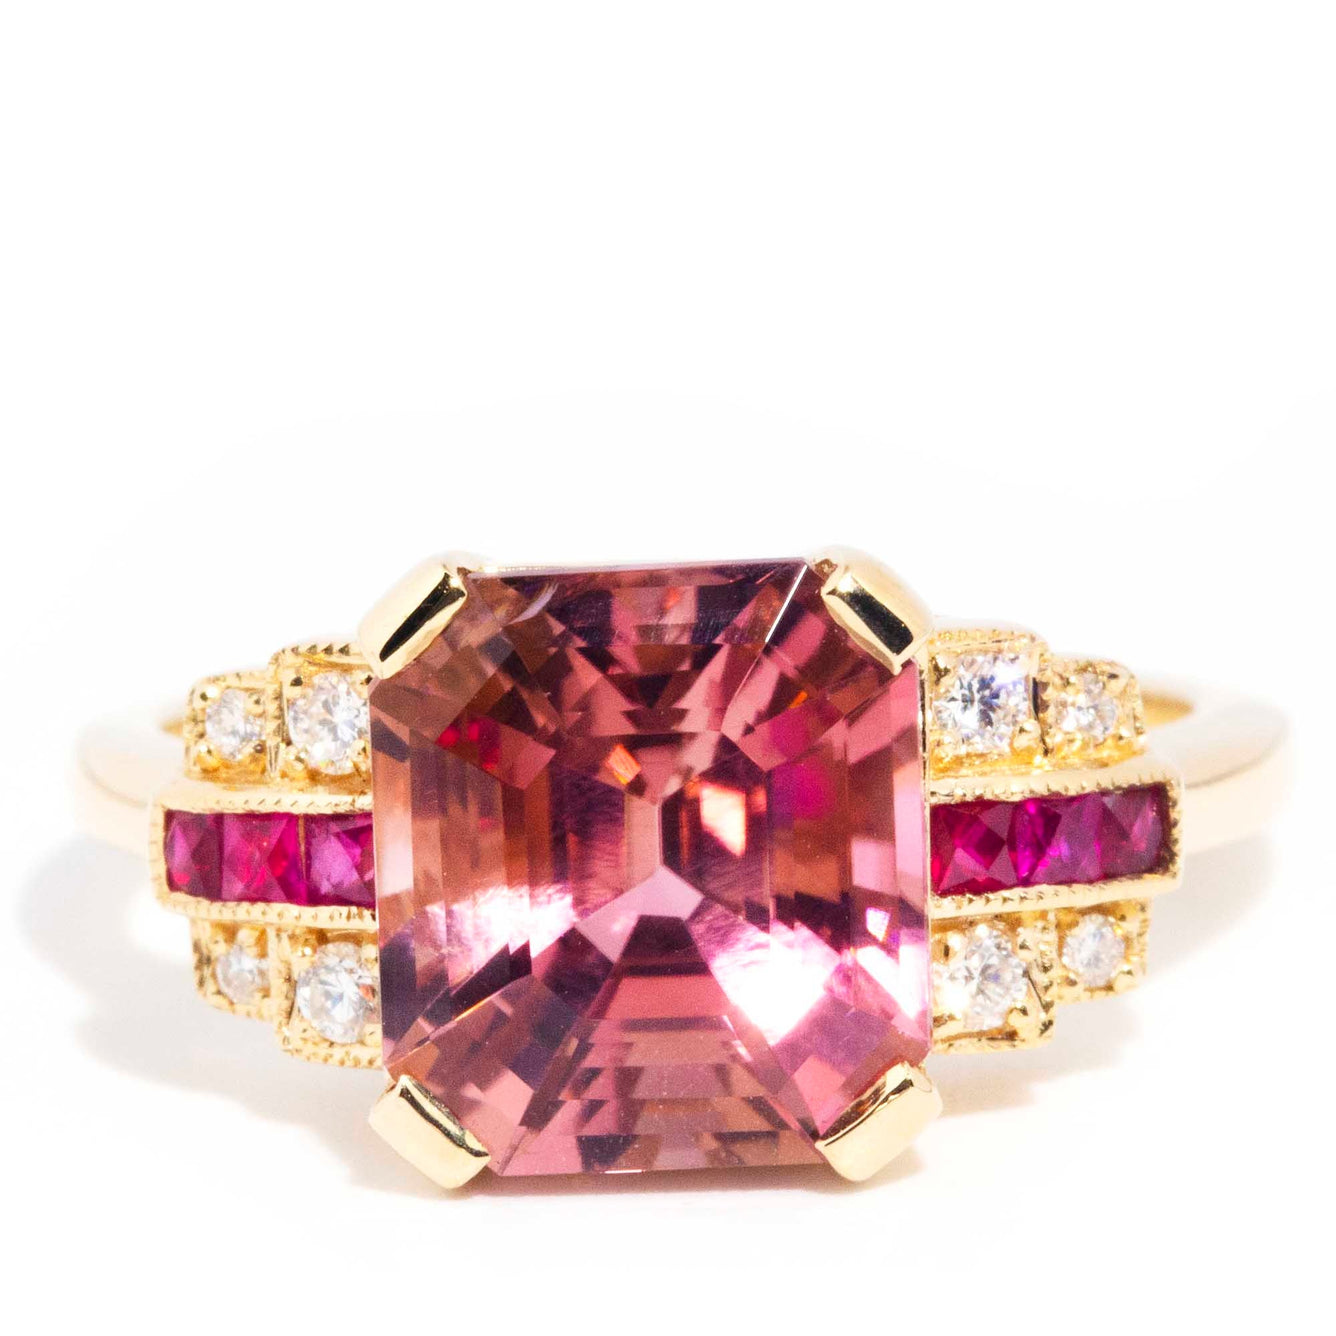 Dorothy 4.21ct Pink Tourmaline Ruby & Diamond 18ct Gold Ring* GTG Rings Imperial Jewellery Imperial Jewellery - Hamilton